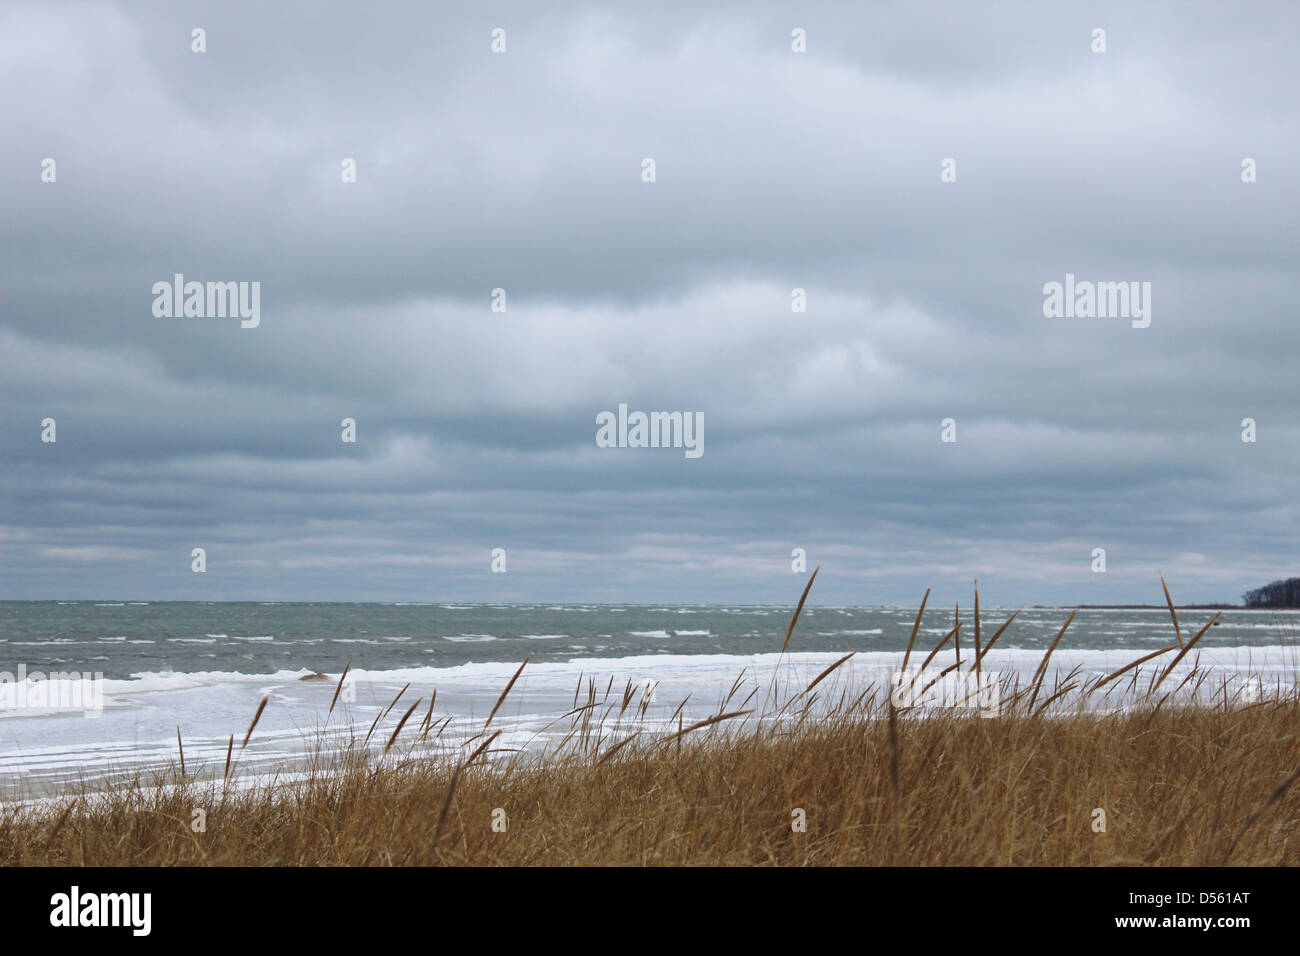 Dune grass blowing in the breeze, with a frozen Lake Huron in the background. Stock Photo